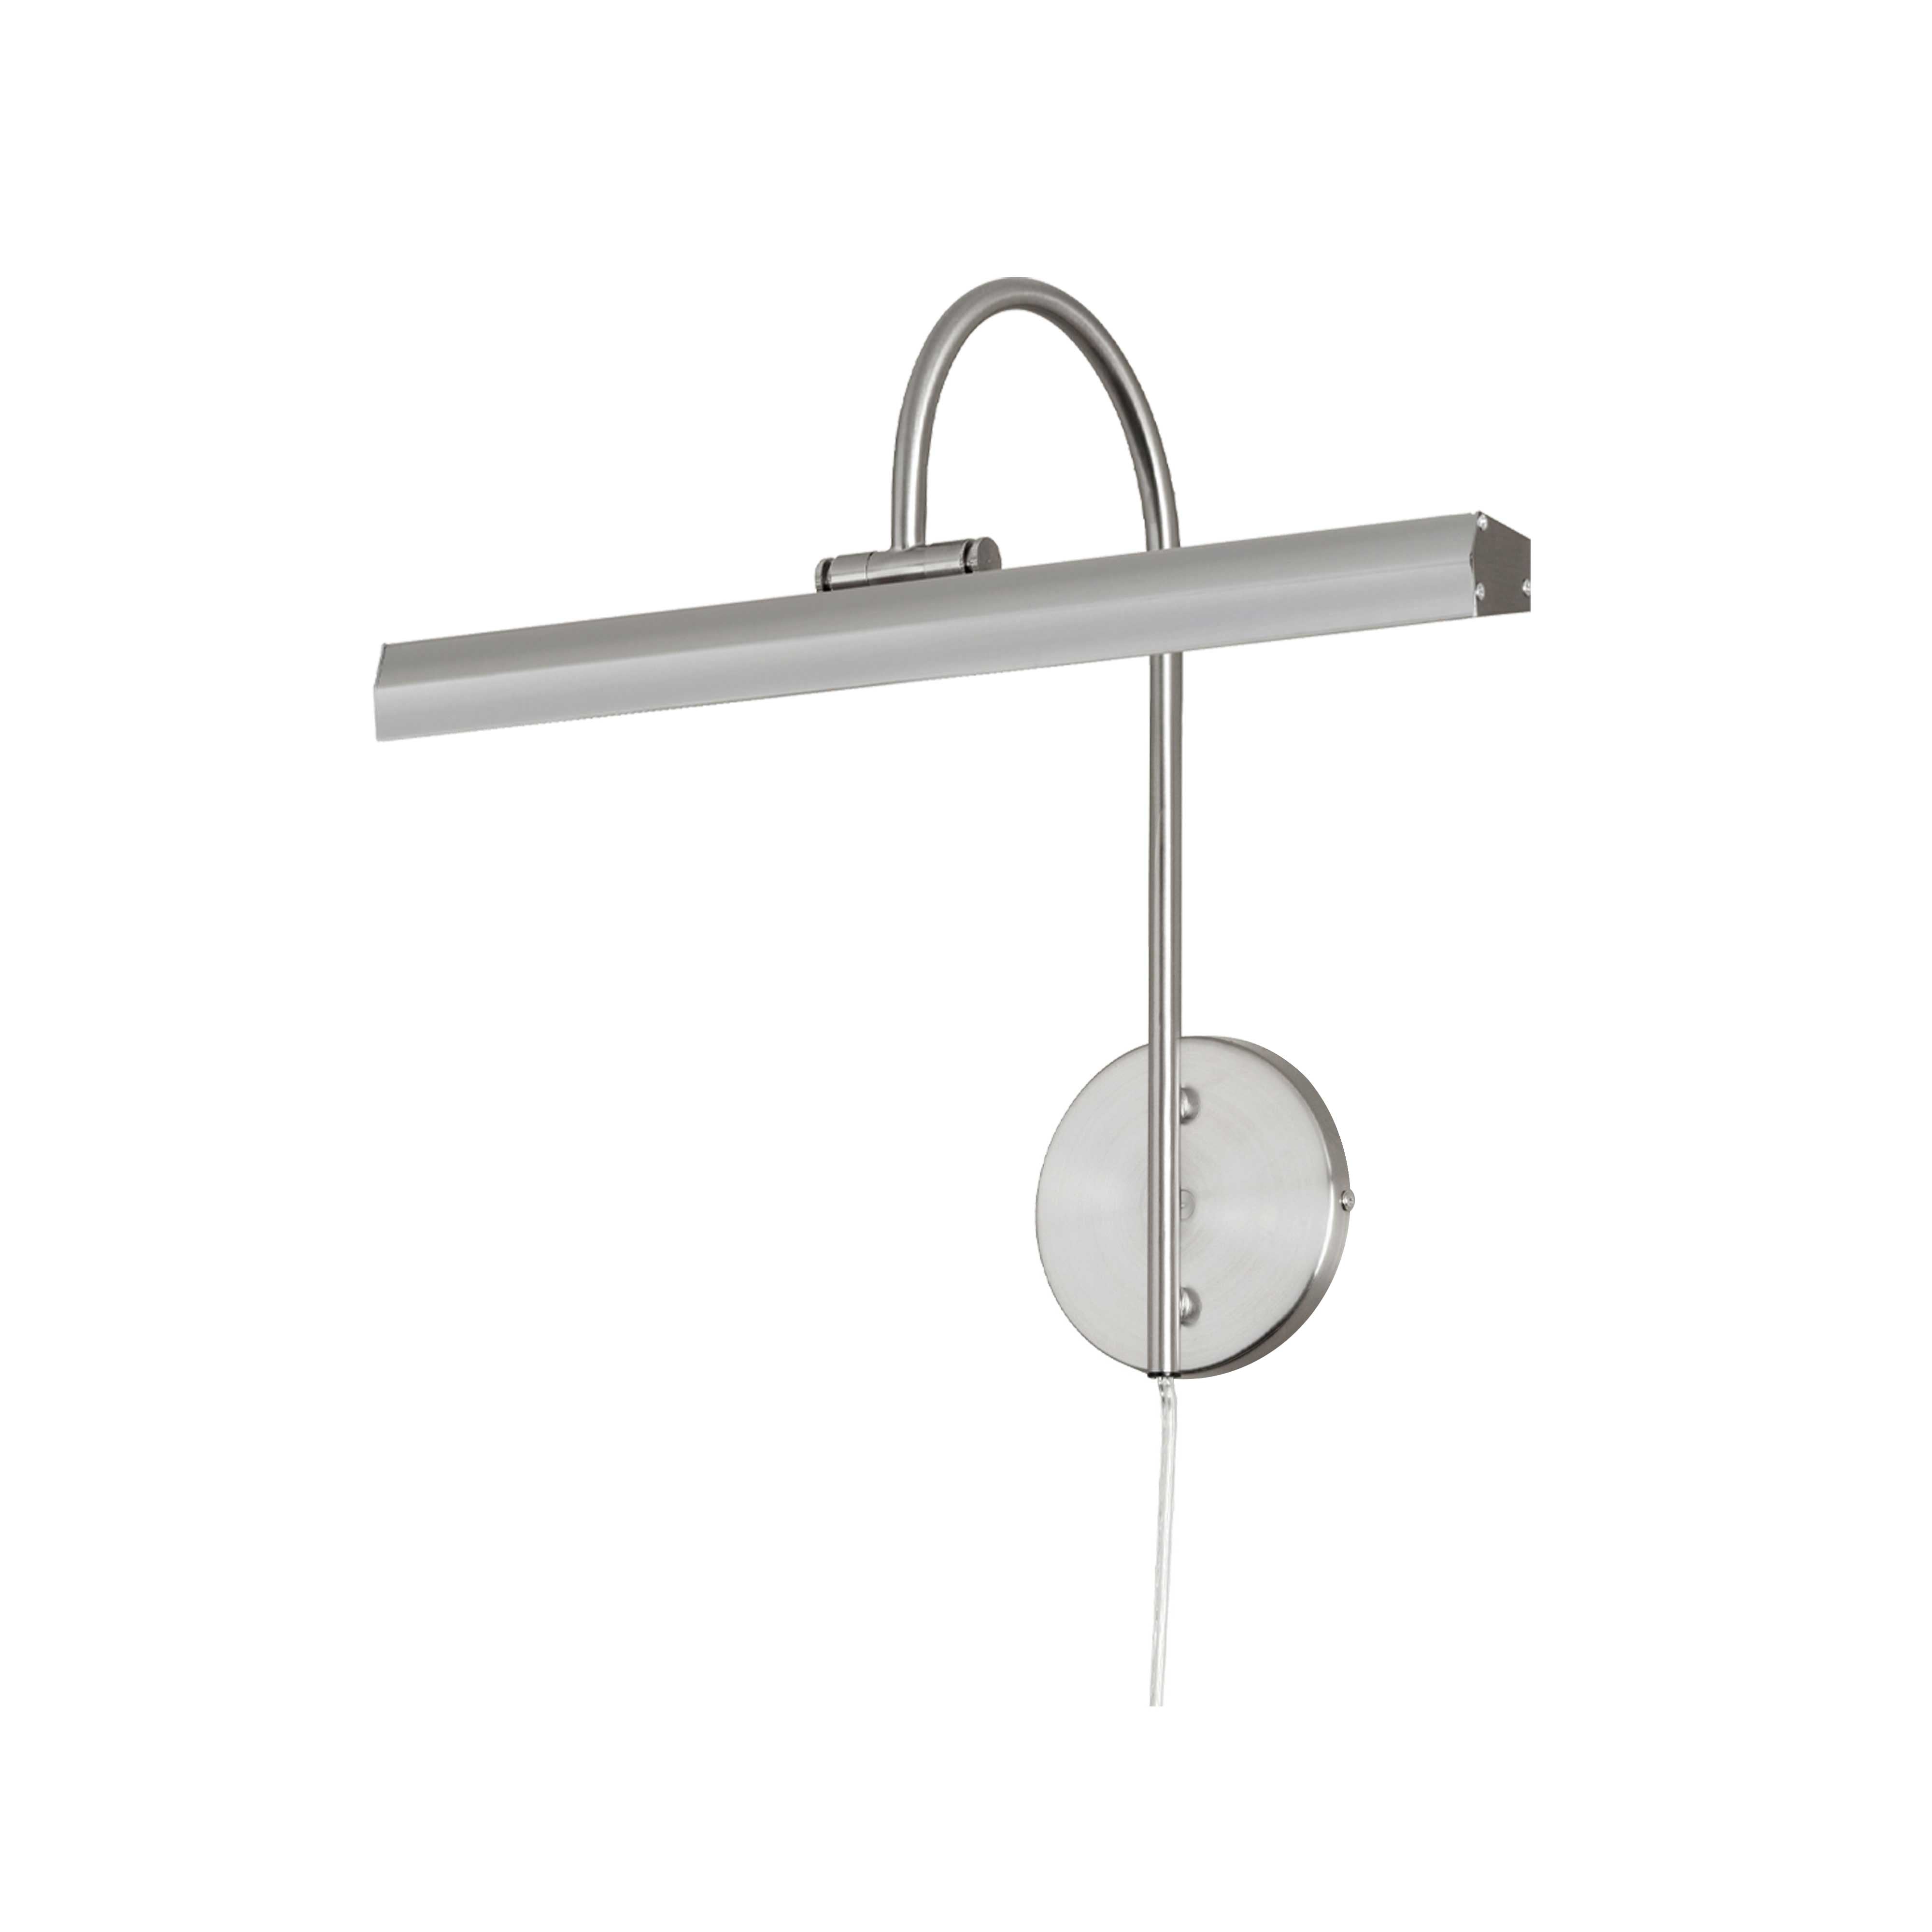 DISPLAY/EXHIBIT Wall sconce à tableau Chrome INTEGRATED LED - PIC120-16LED-SC | DAINOLITE